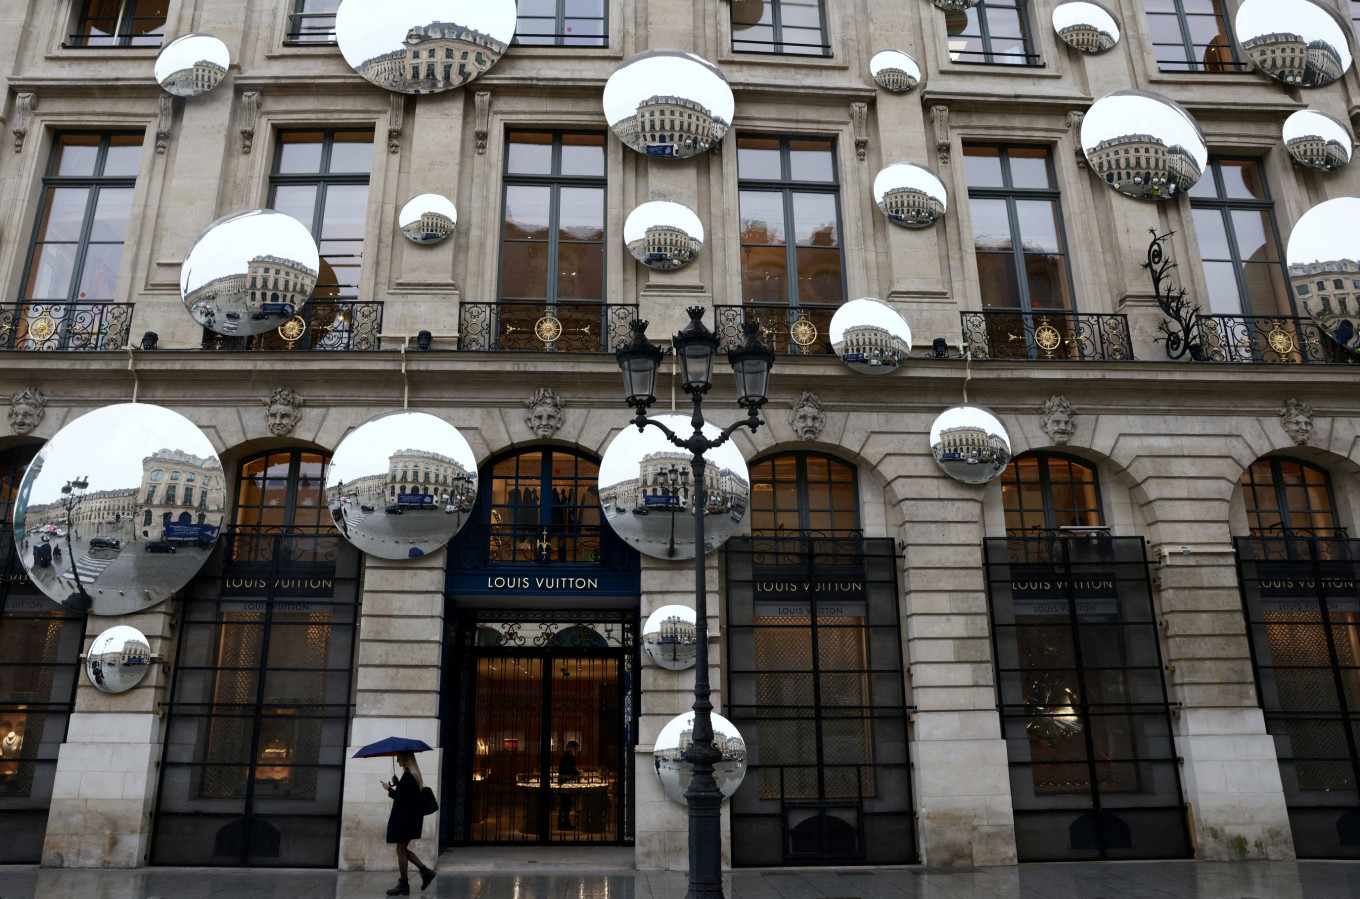 China luxury boom returns but LVMH, Hermes stand out from crowd